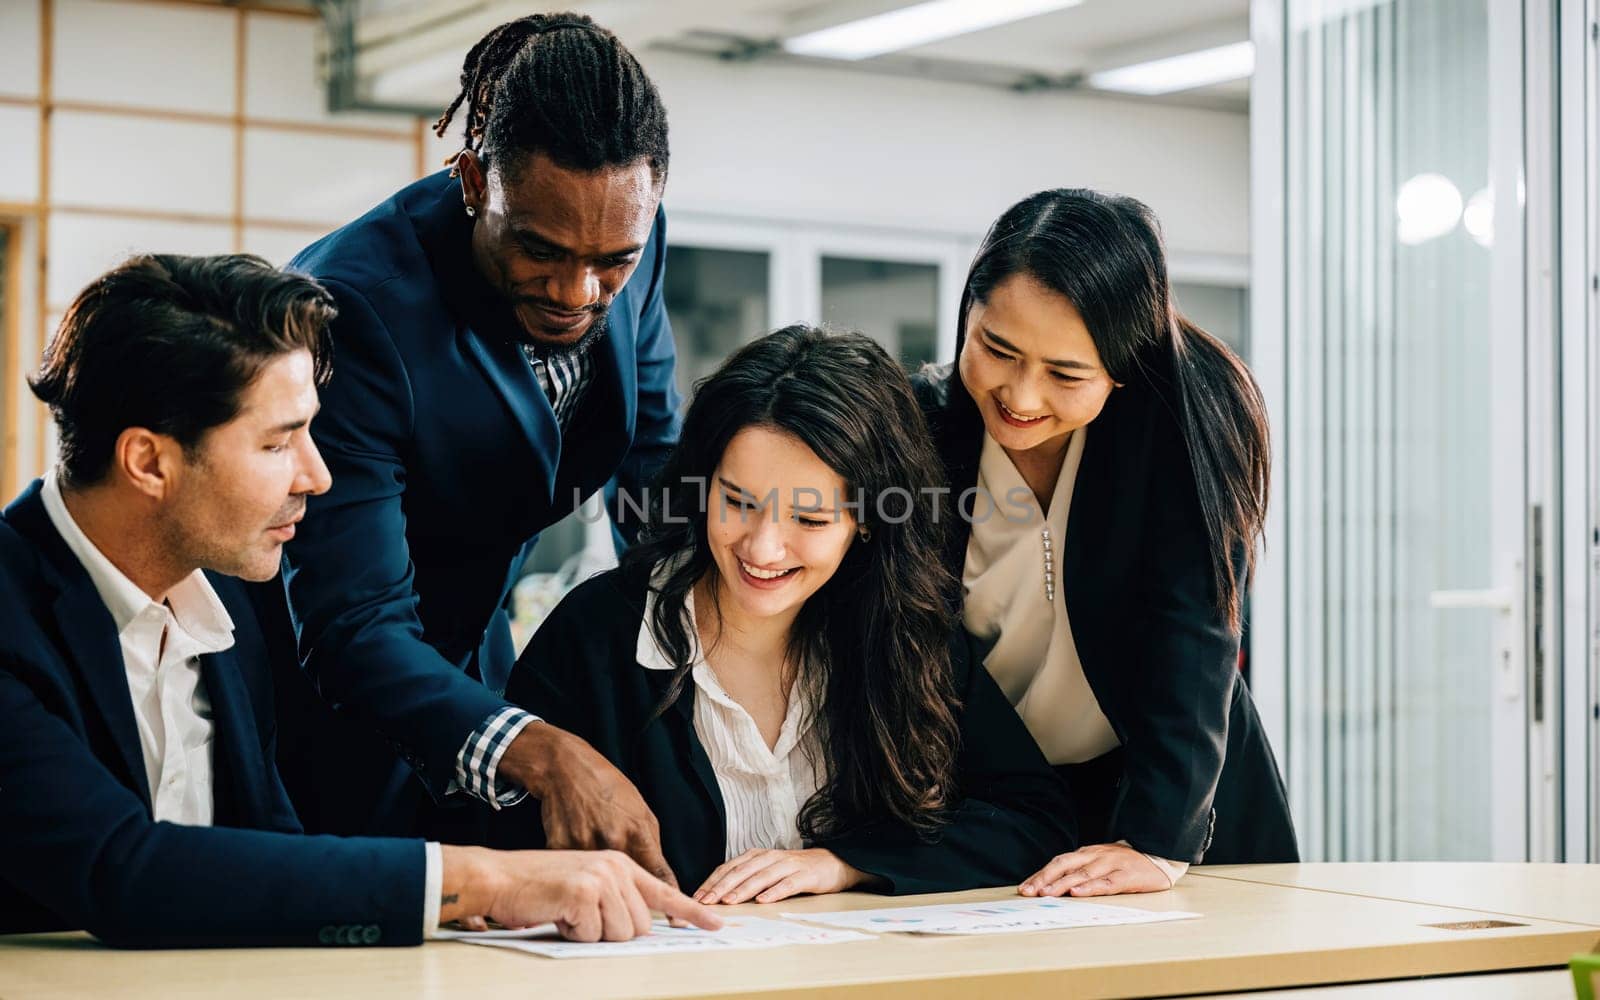 A diverse international team, with a female leader, collaborates in a meeting room. They work together, analyze graphs, and discuss strategies, displaying their commitment to success. Teamwork by Sorapop